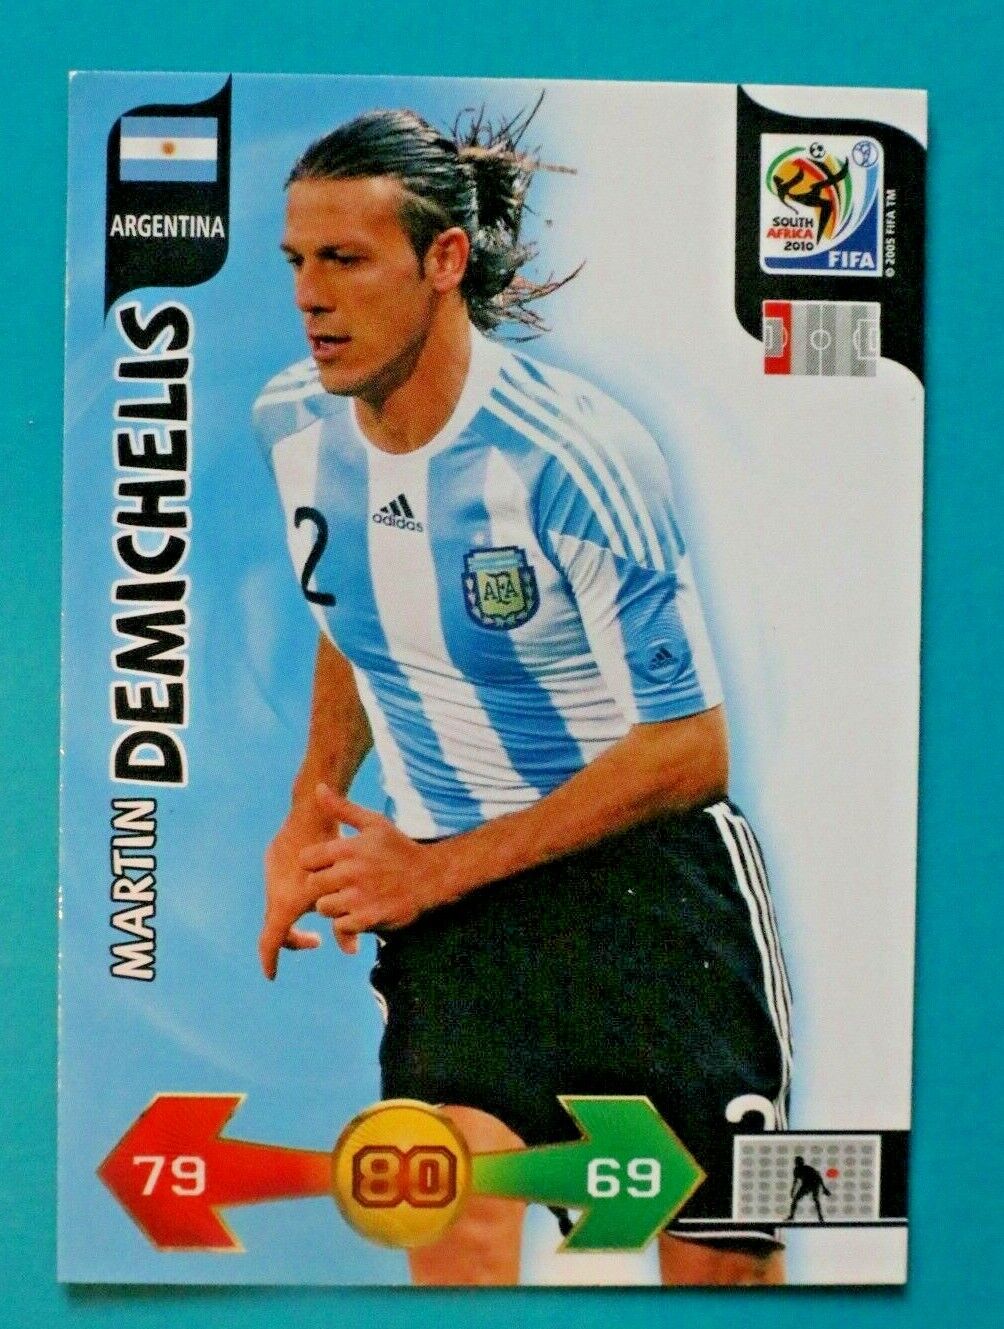 2010 WORLD CUP, ARGENTINA FOOTBALL Panini Adrenalyn XL South Africa, trade cards